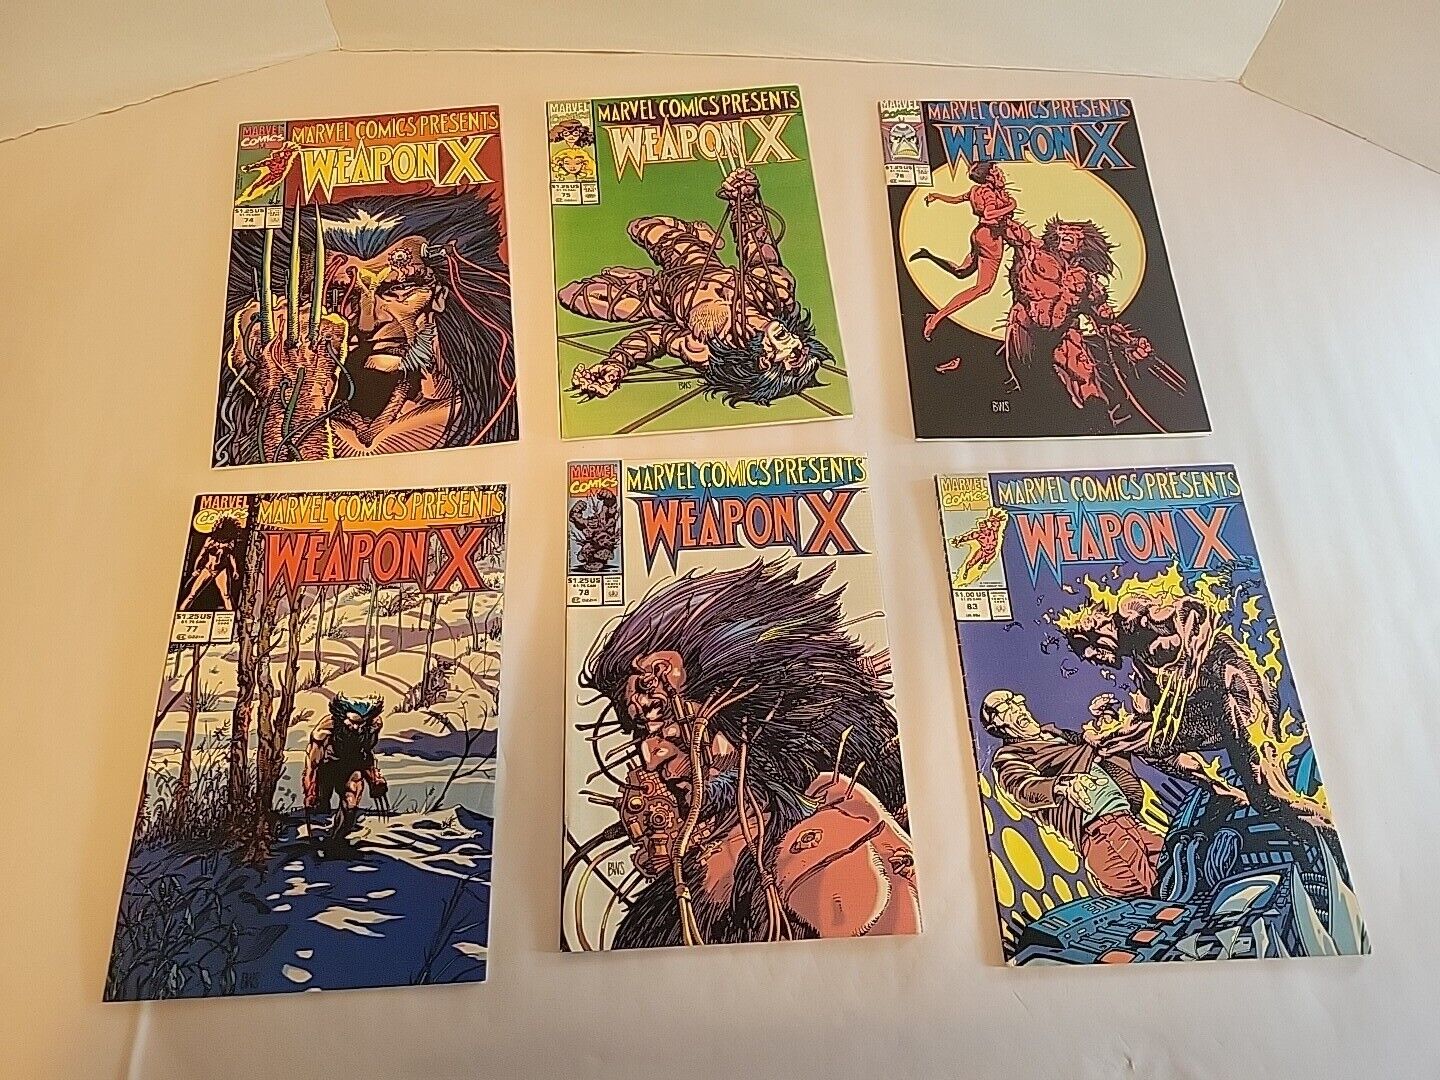 VTG Marvel Comics Presents Wolverine Weapon X, Lot of 6 Issues 74 75 76 77 78 83